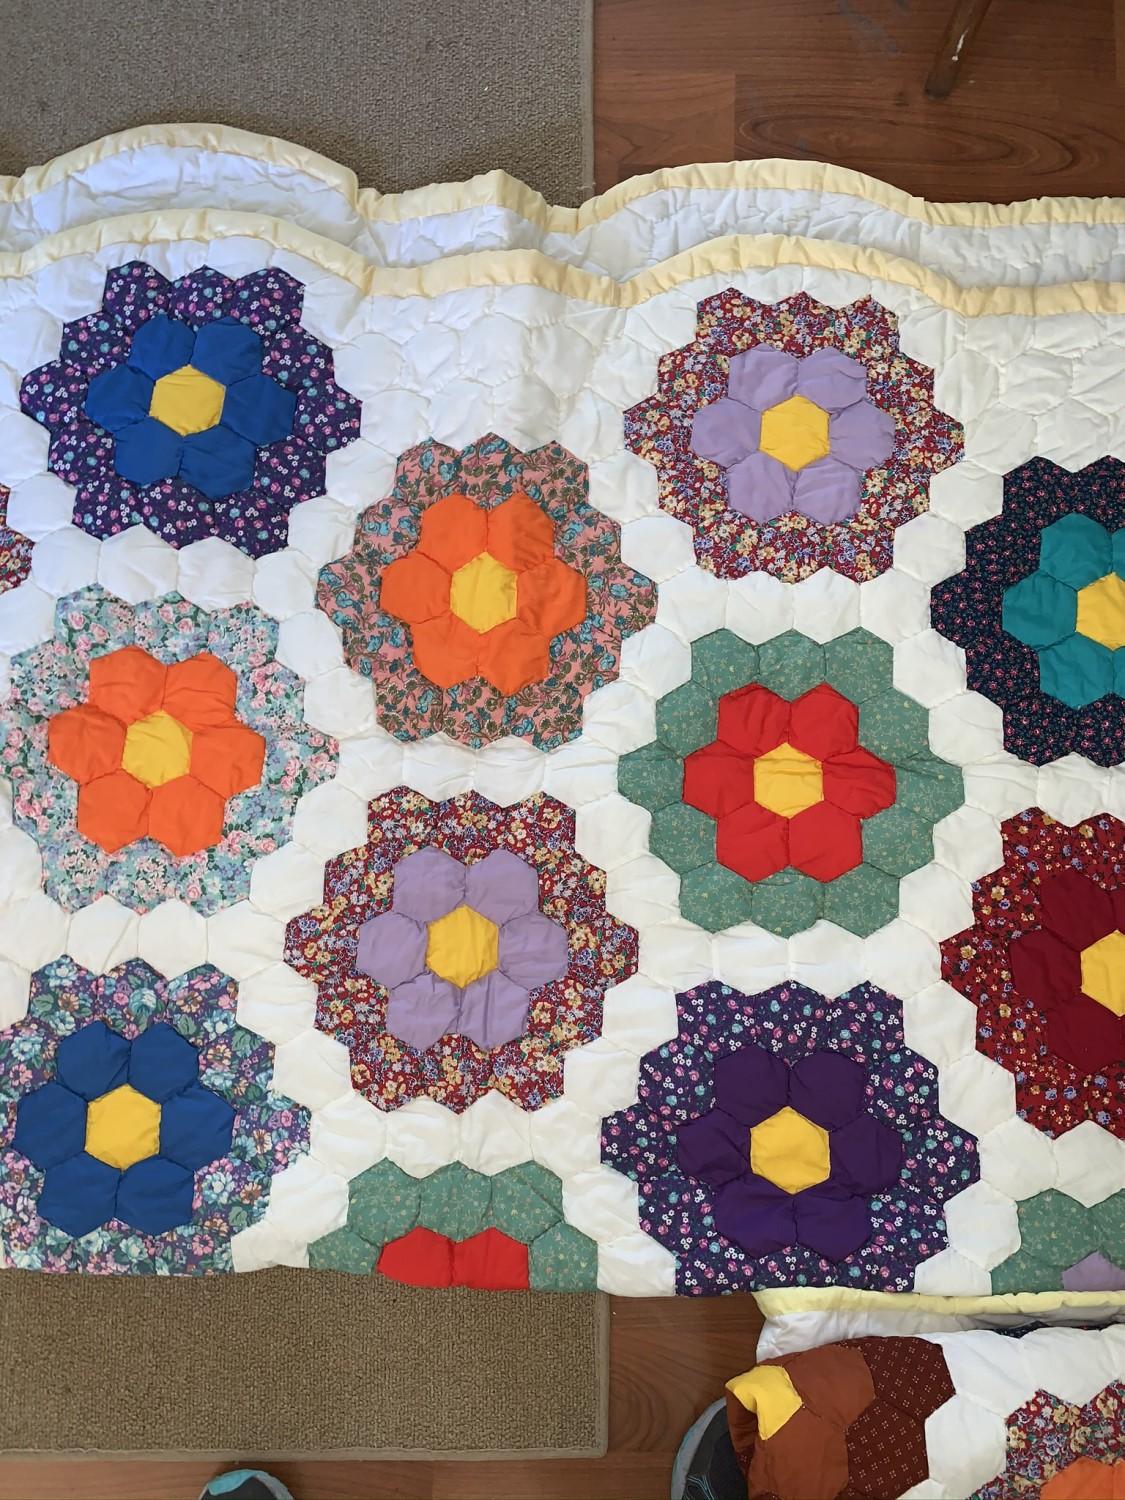 3 Beautiful Hand Stitched Quilts